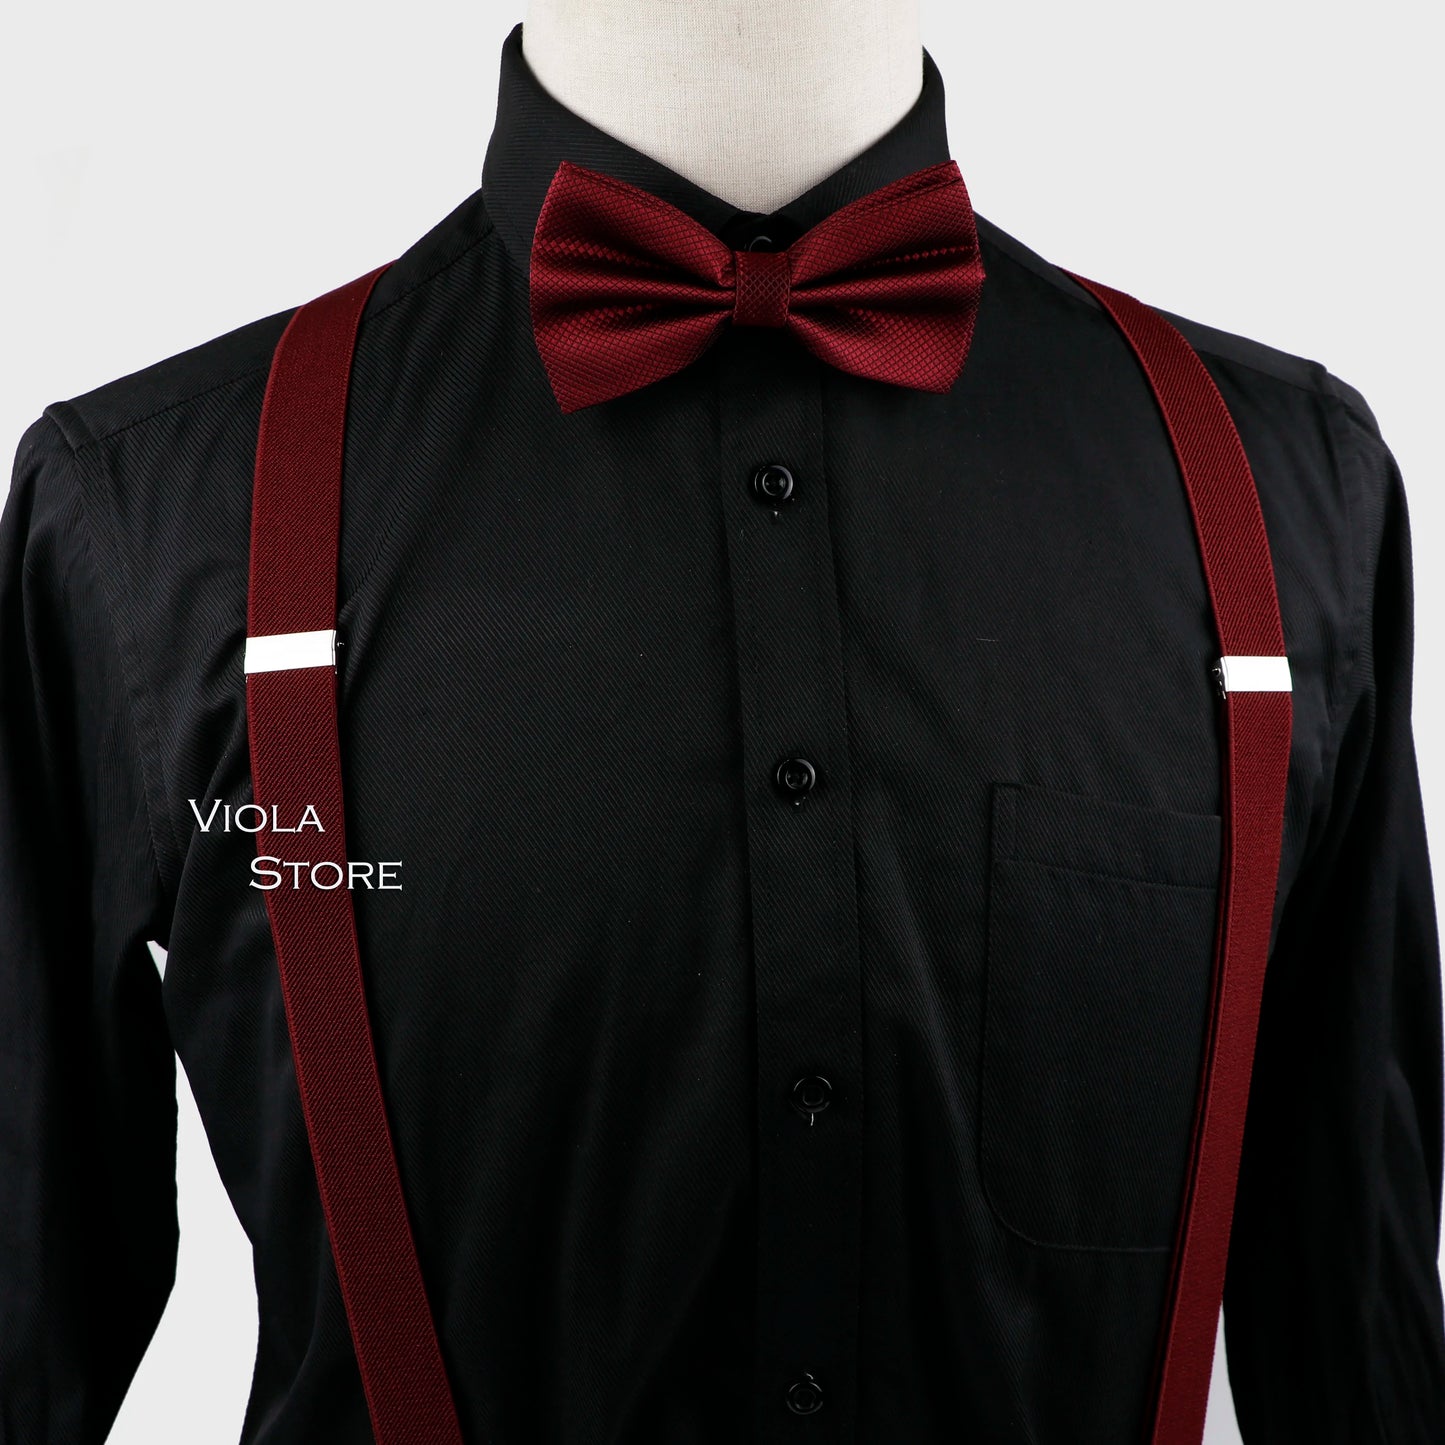 2 Sizes Colorful Solid Elastic Suspender Bow Tie Hankie Sets